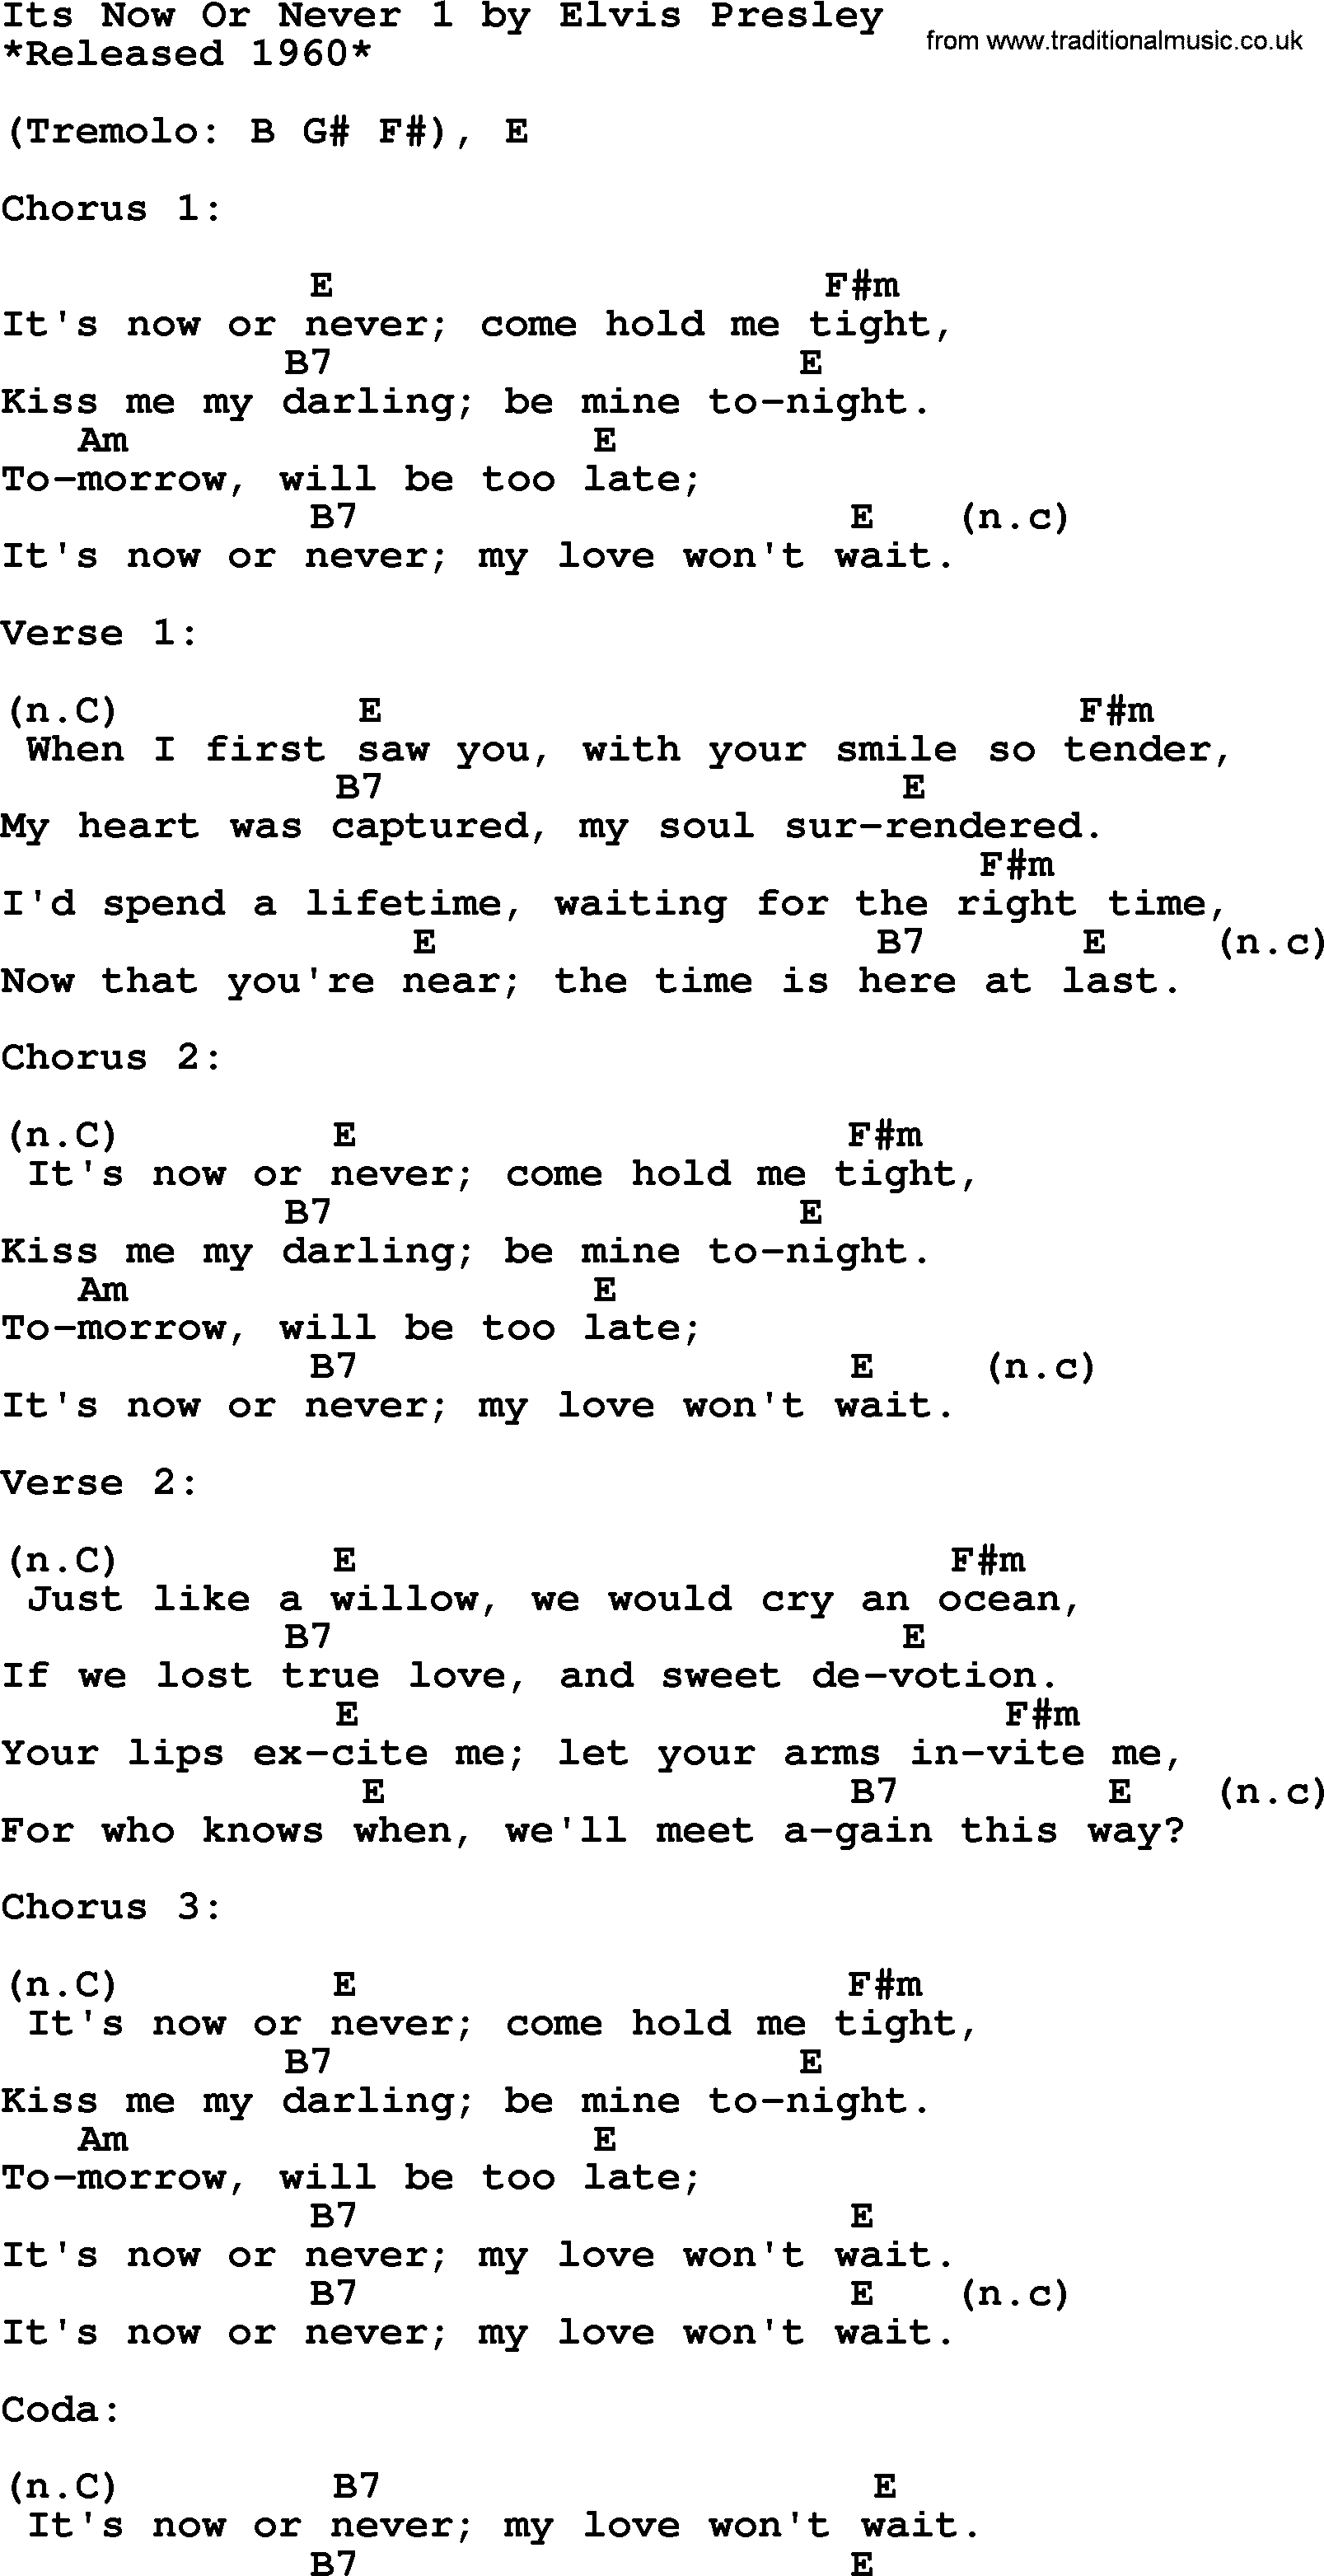 Elvis Presley song: Its Now Or Never 1, lyrics and chords